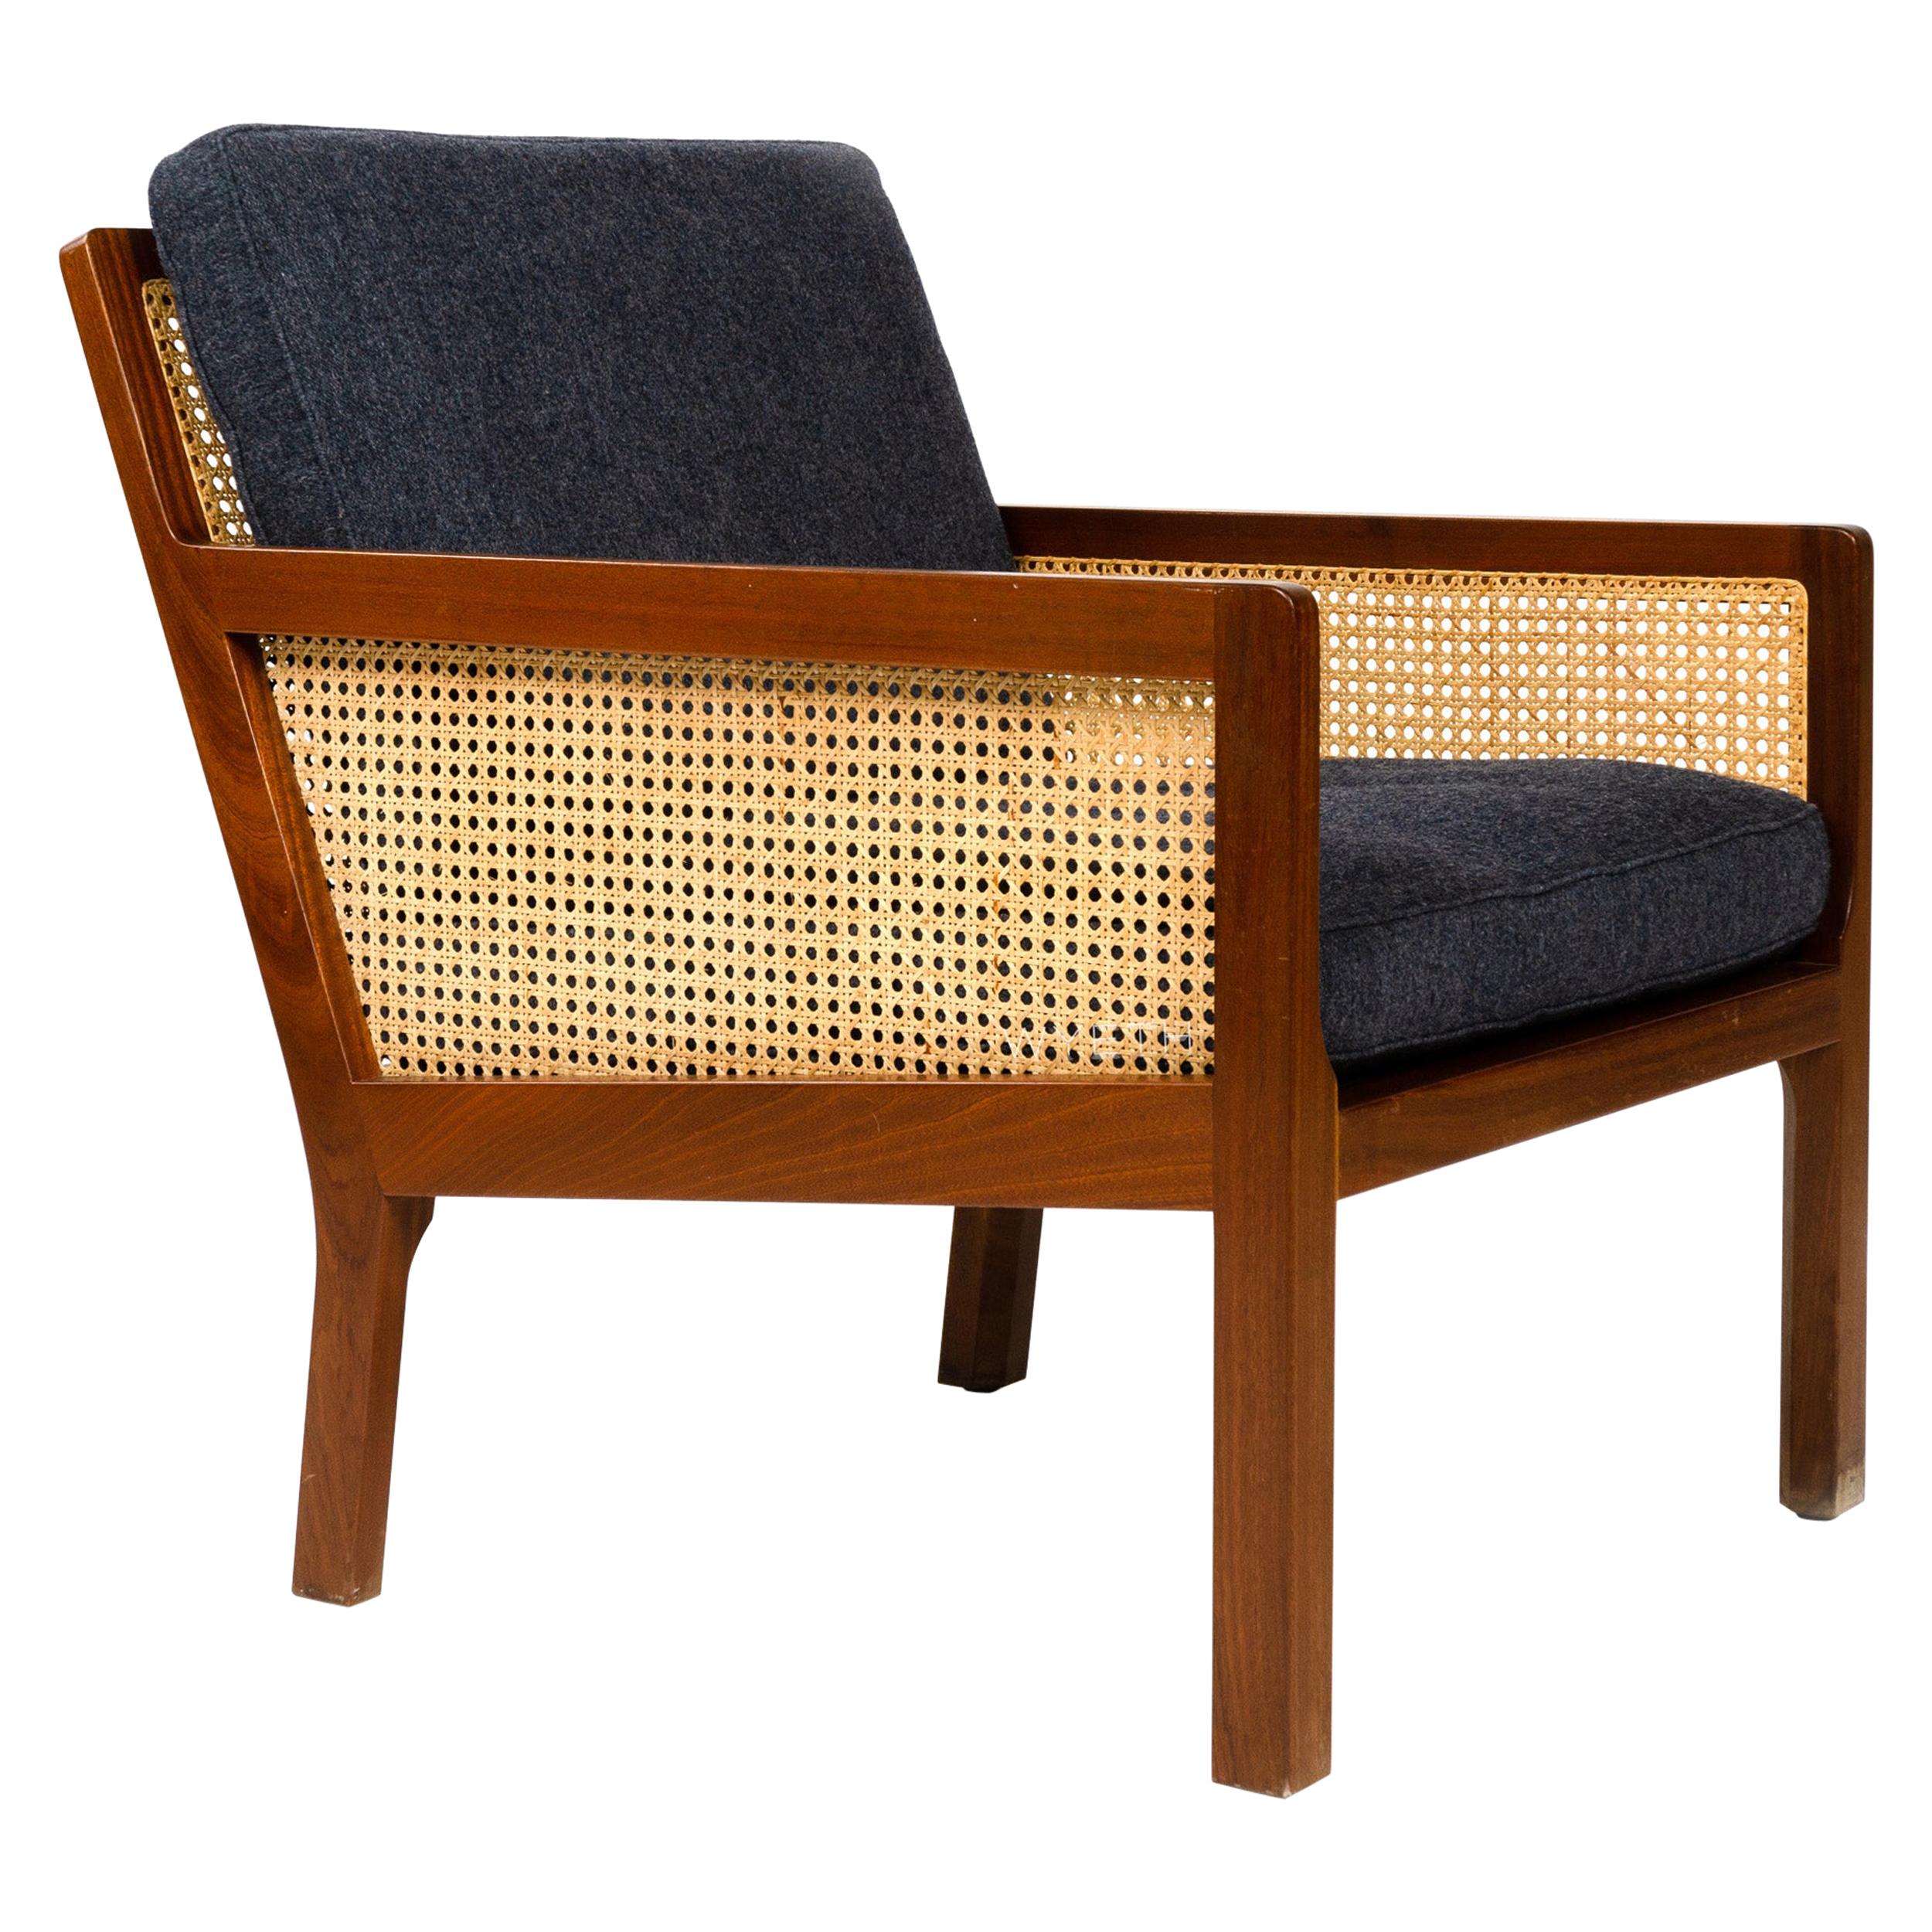 1960s Mahogany & Cane Lounge Chair by Bernt Petersen for Worts Mobelsnedkeri